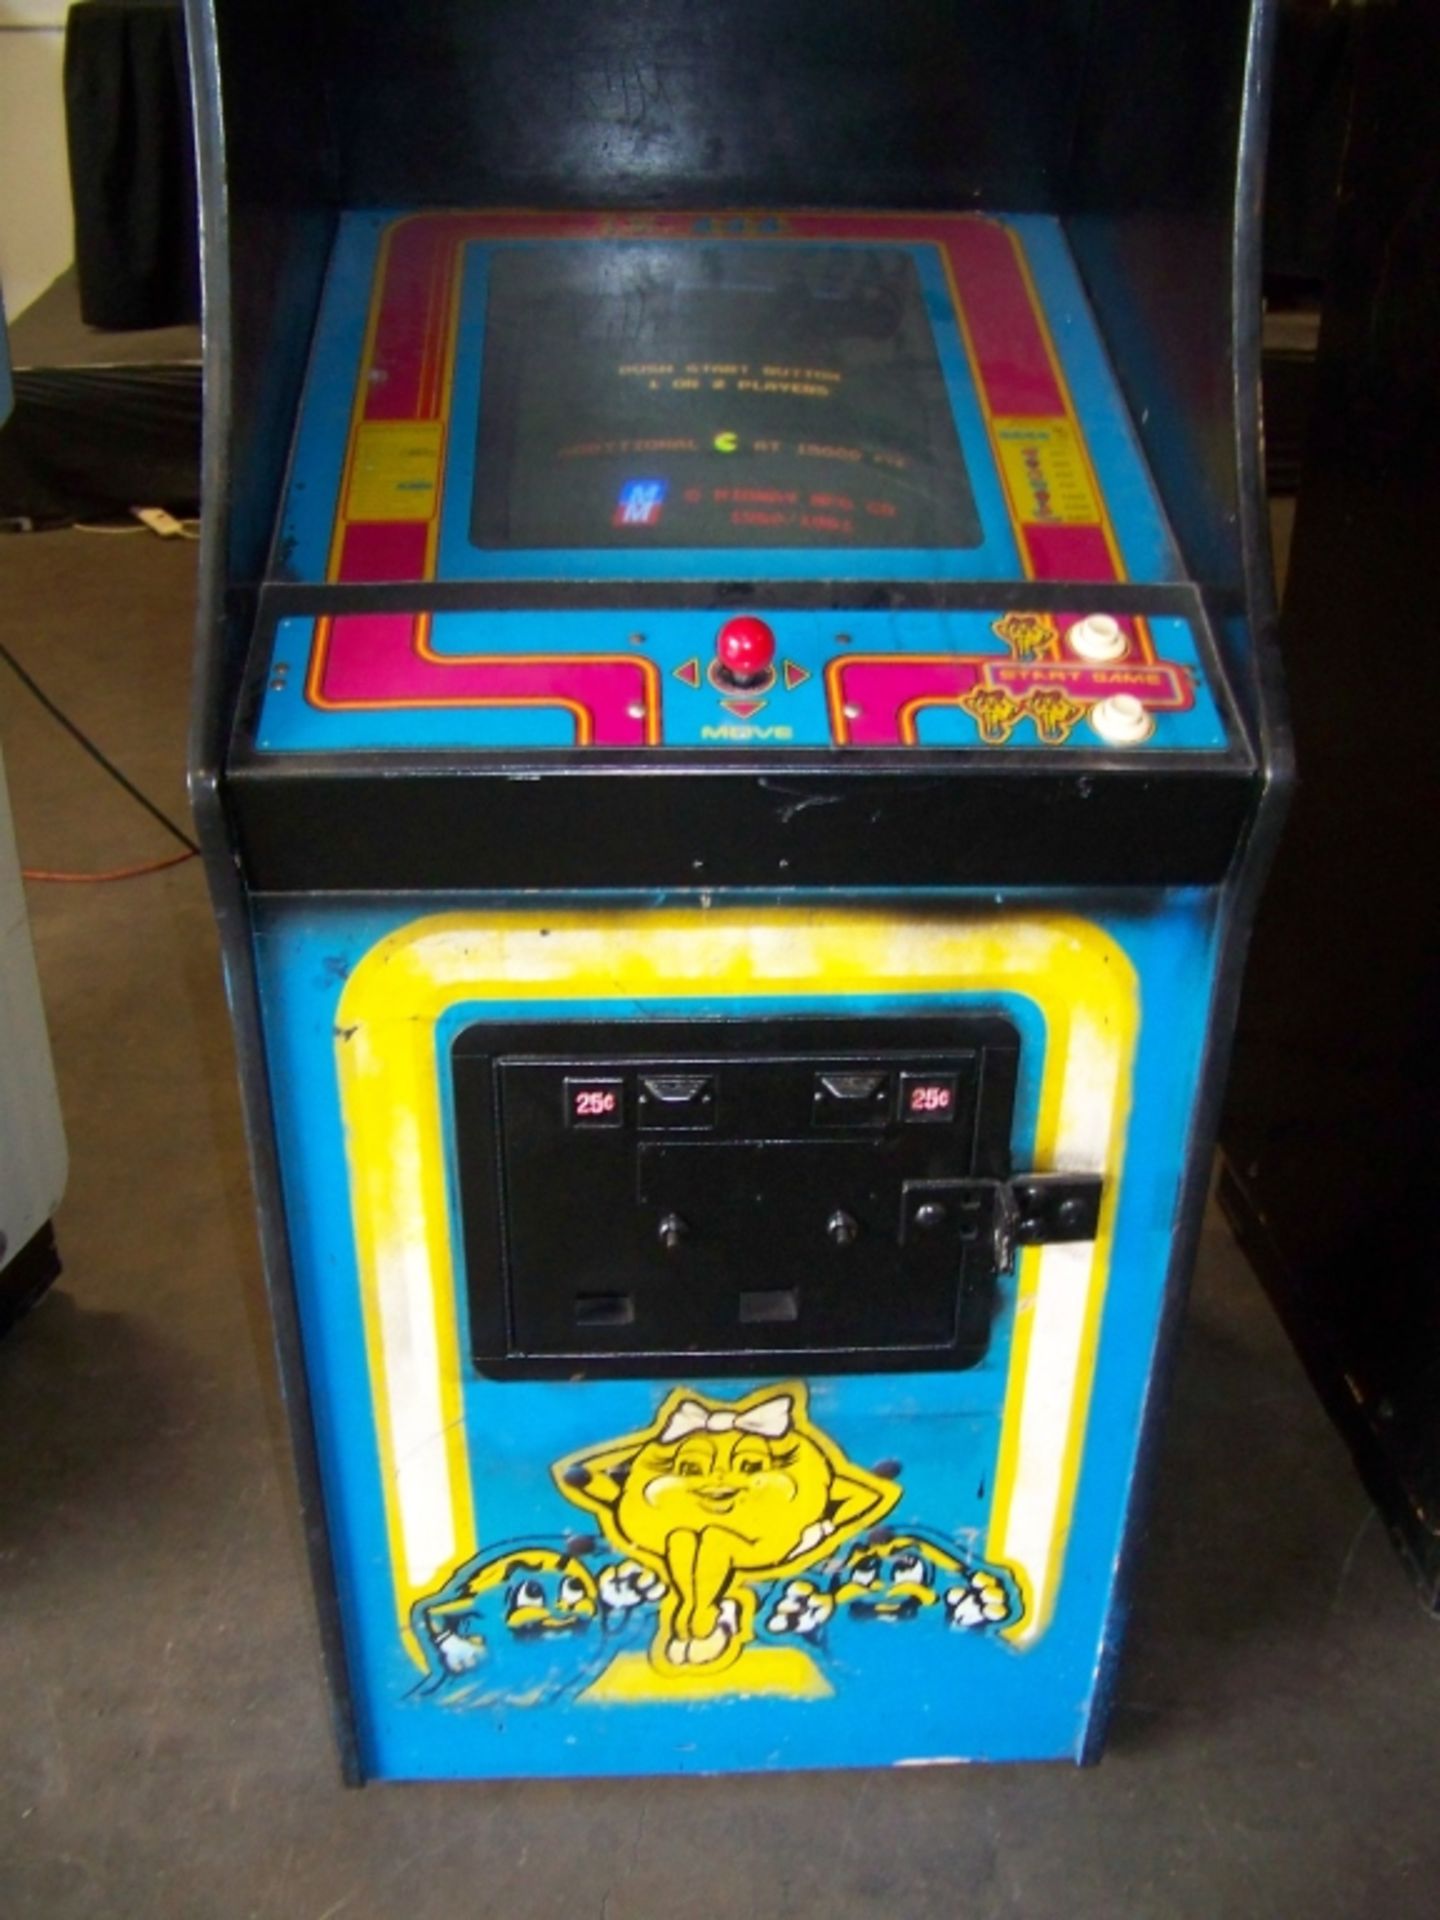 MS PACMAN CLASSIC UPRIGHT ARCADE GAME MIDWAY Item is in used condition. Evidence of wear and